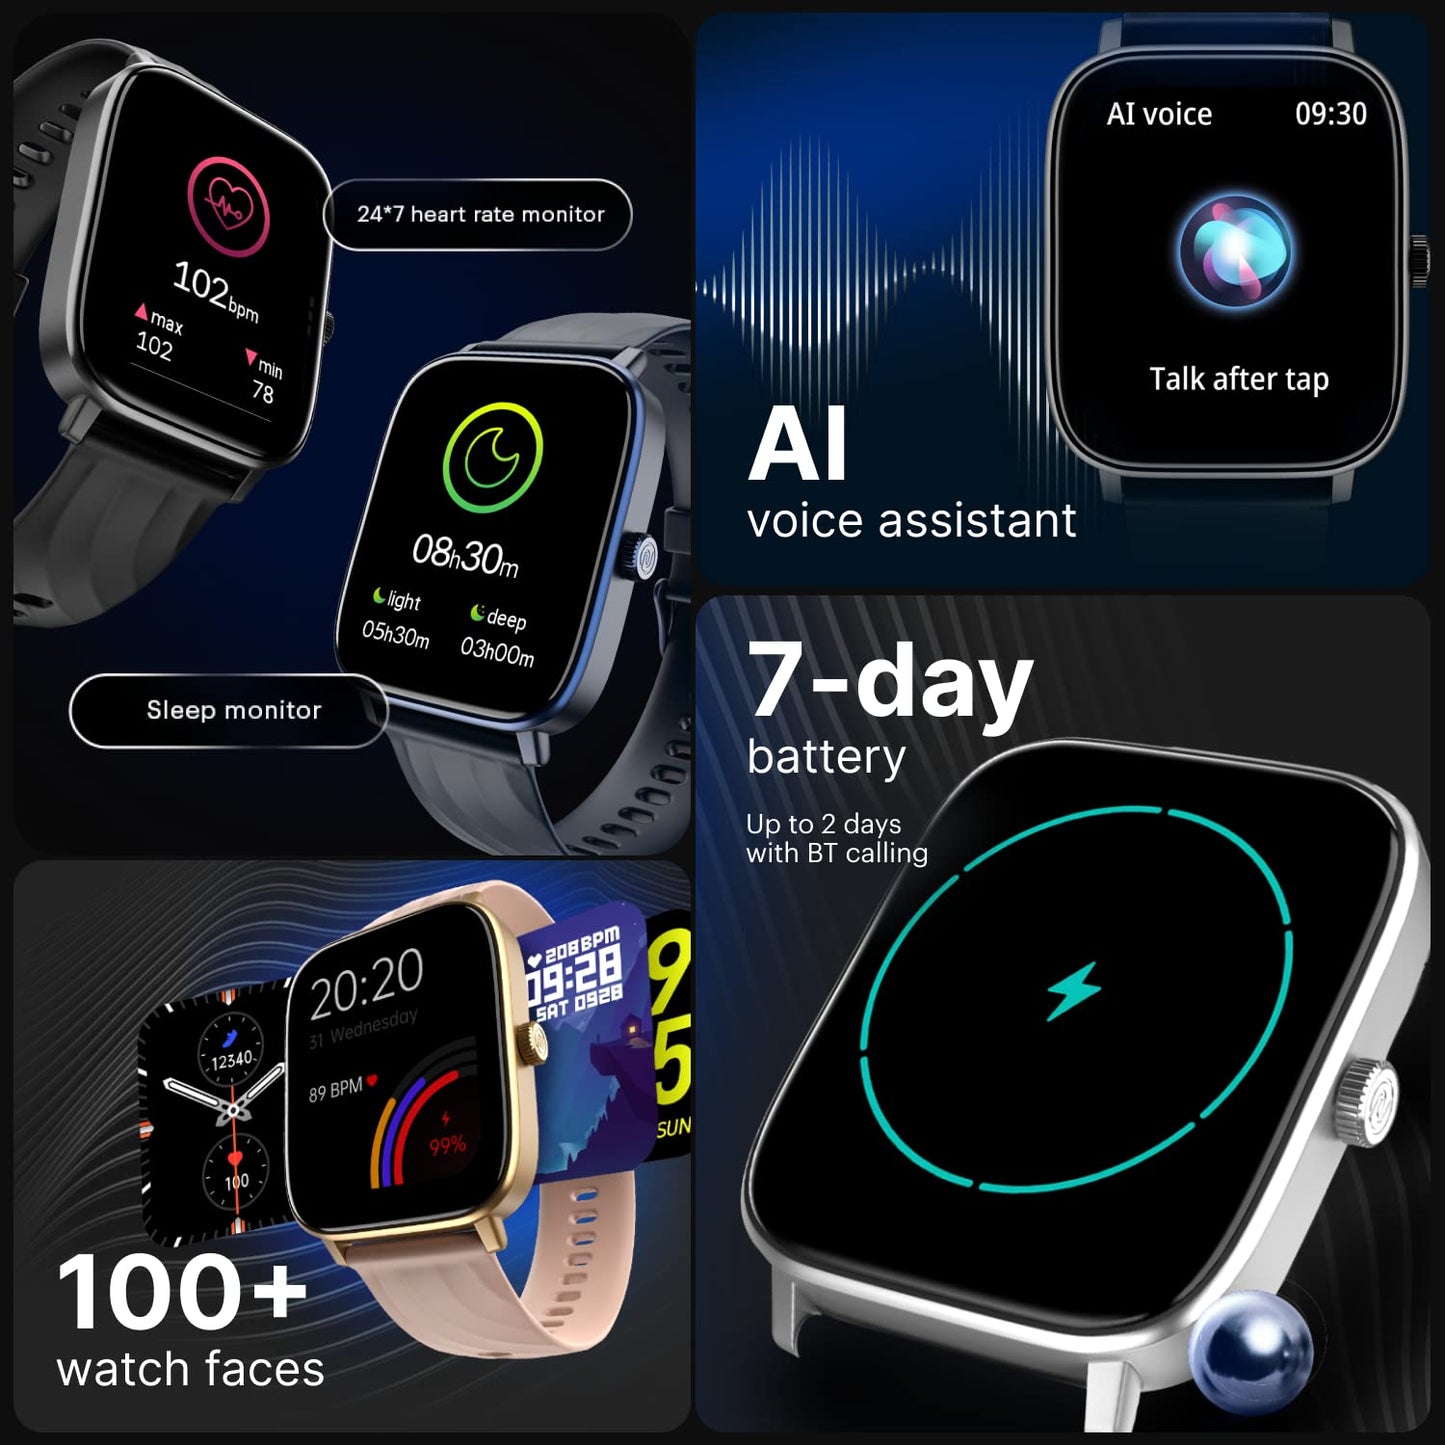 Noise Newly Launched Quad Call 1.81" Display, Bluetooth Calling Smart Watch, AI Voice Assistance, 160+Hrs Battery Life, Metallic Build, in-Built Games, 100 Sports Modes, 100+ Watch Faces (Jet Black)